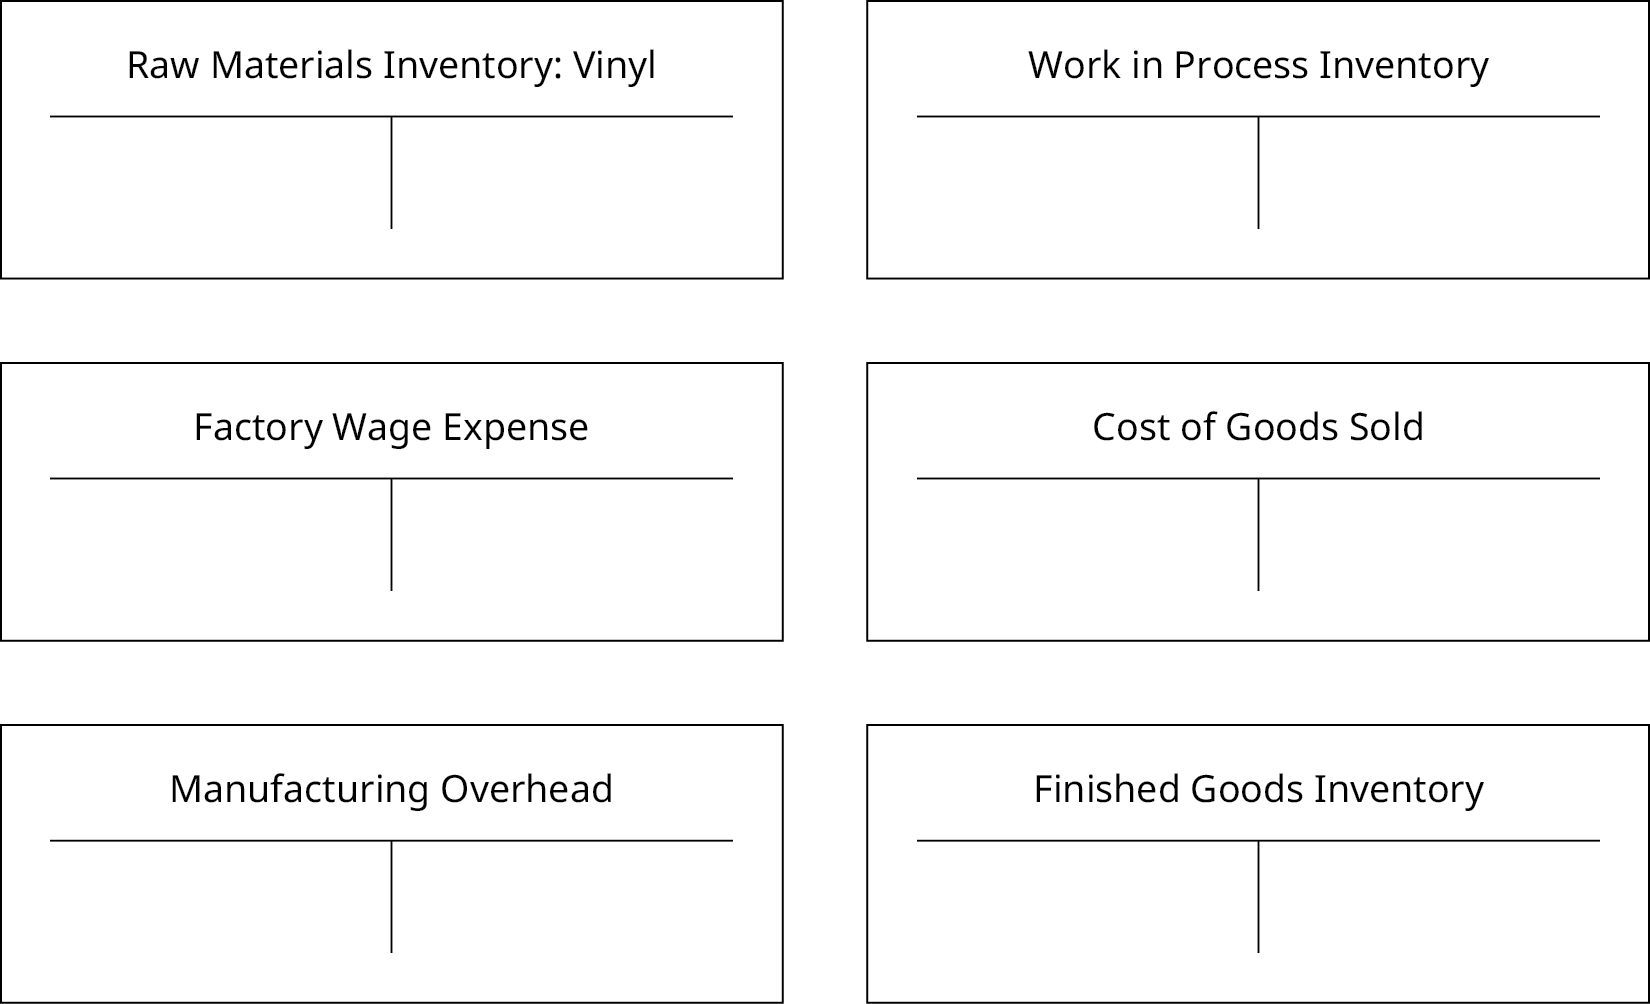 There are six blank T-Accounts in this figure: one each for “Raw Materials Inventory: Vinyl”, “Factory Wage Expense”, “Manufacturing Overhead”, “Work in Process Inventory”, “Cost of Goods Sold”, and “Finished Goods Inventory.”